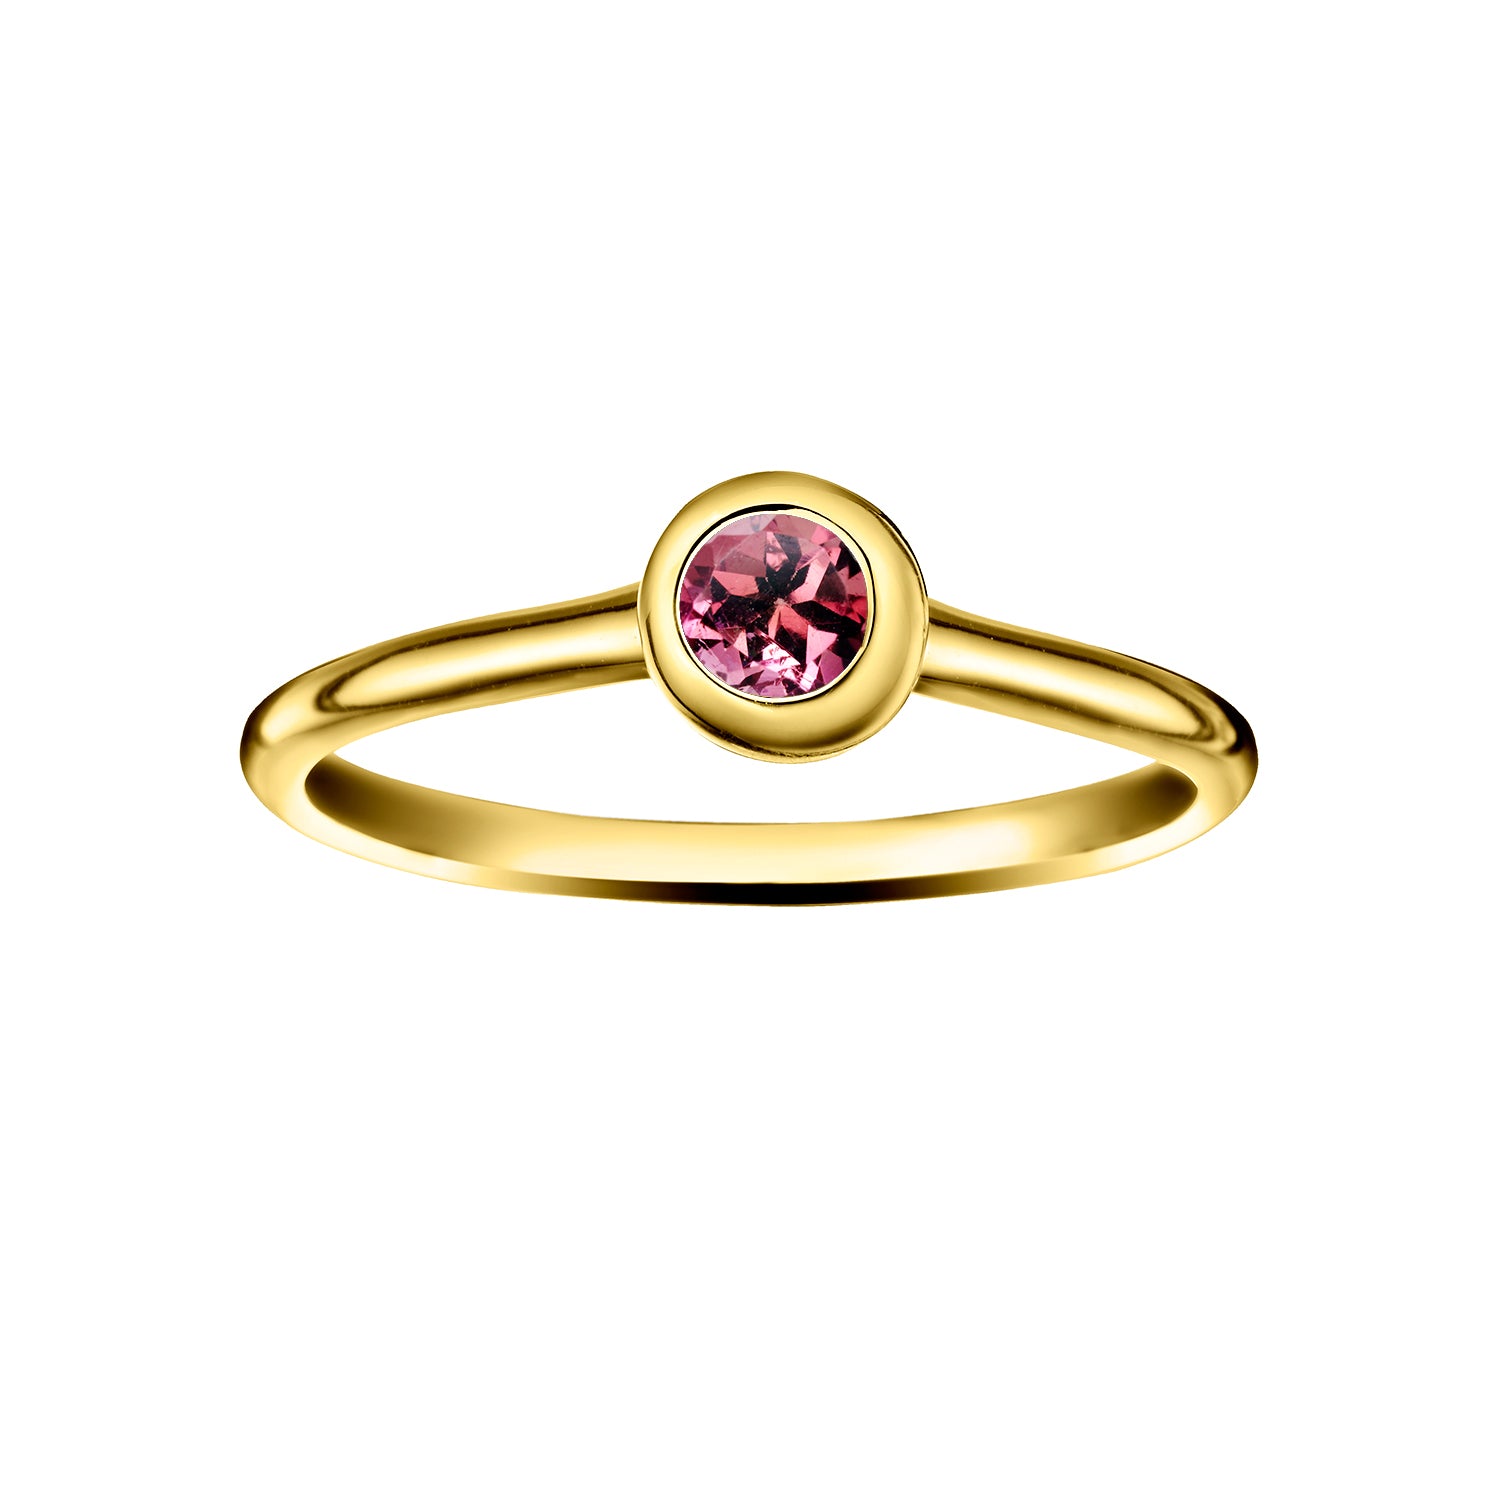 Polished Gold Vermeil Crescent Moon Stacking Birthstone Rings - October / Pink Tourmaline